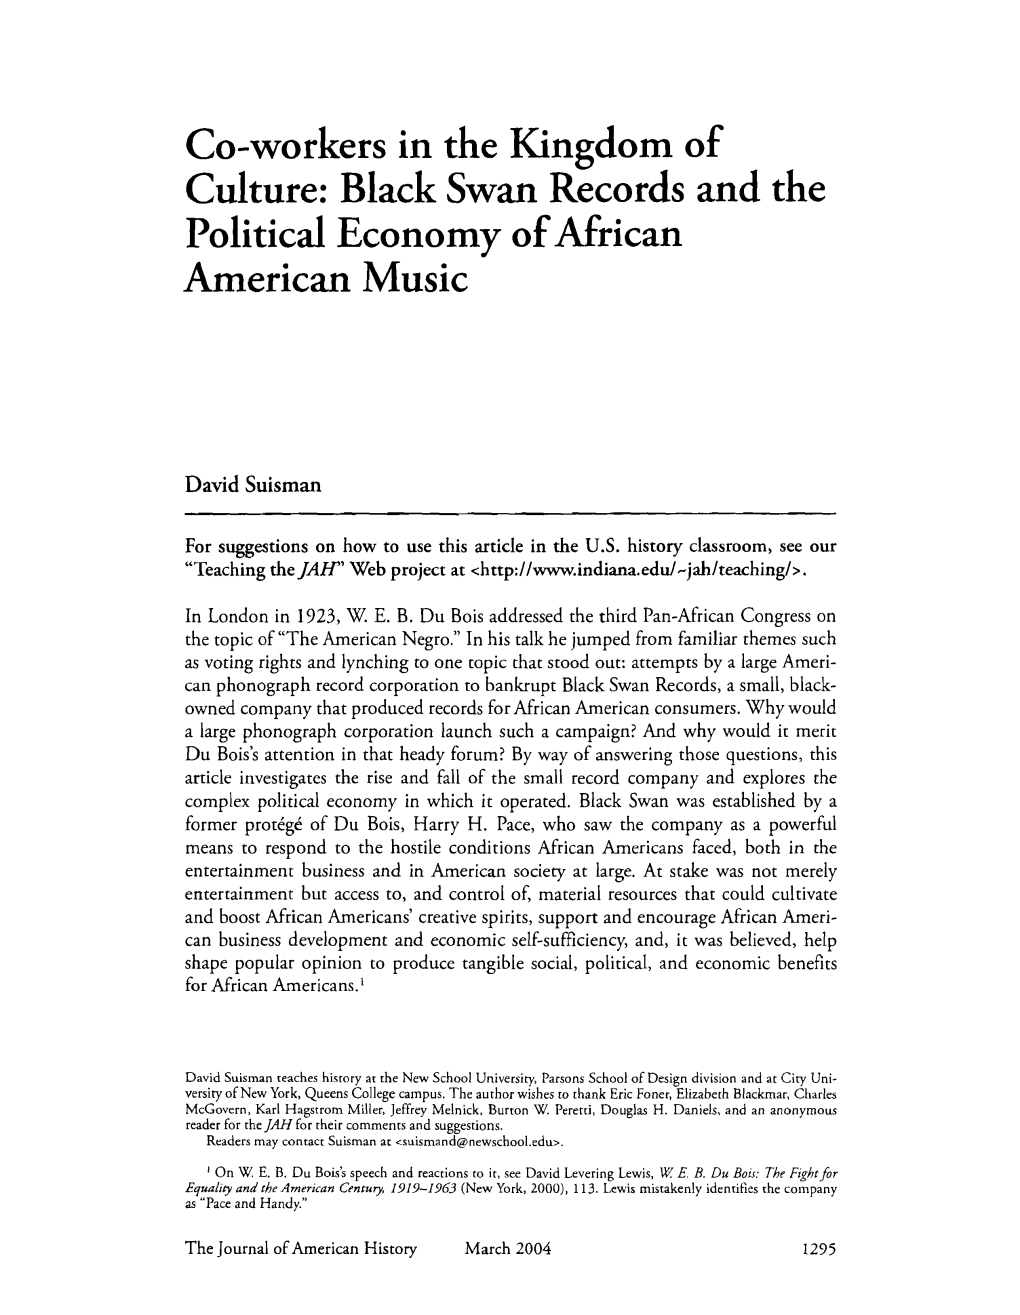 Black Swan Records and the Political Economy Ofmrican American Music